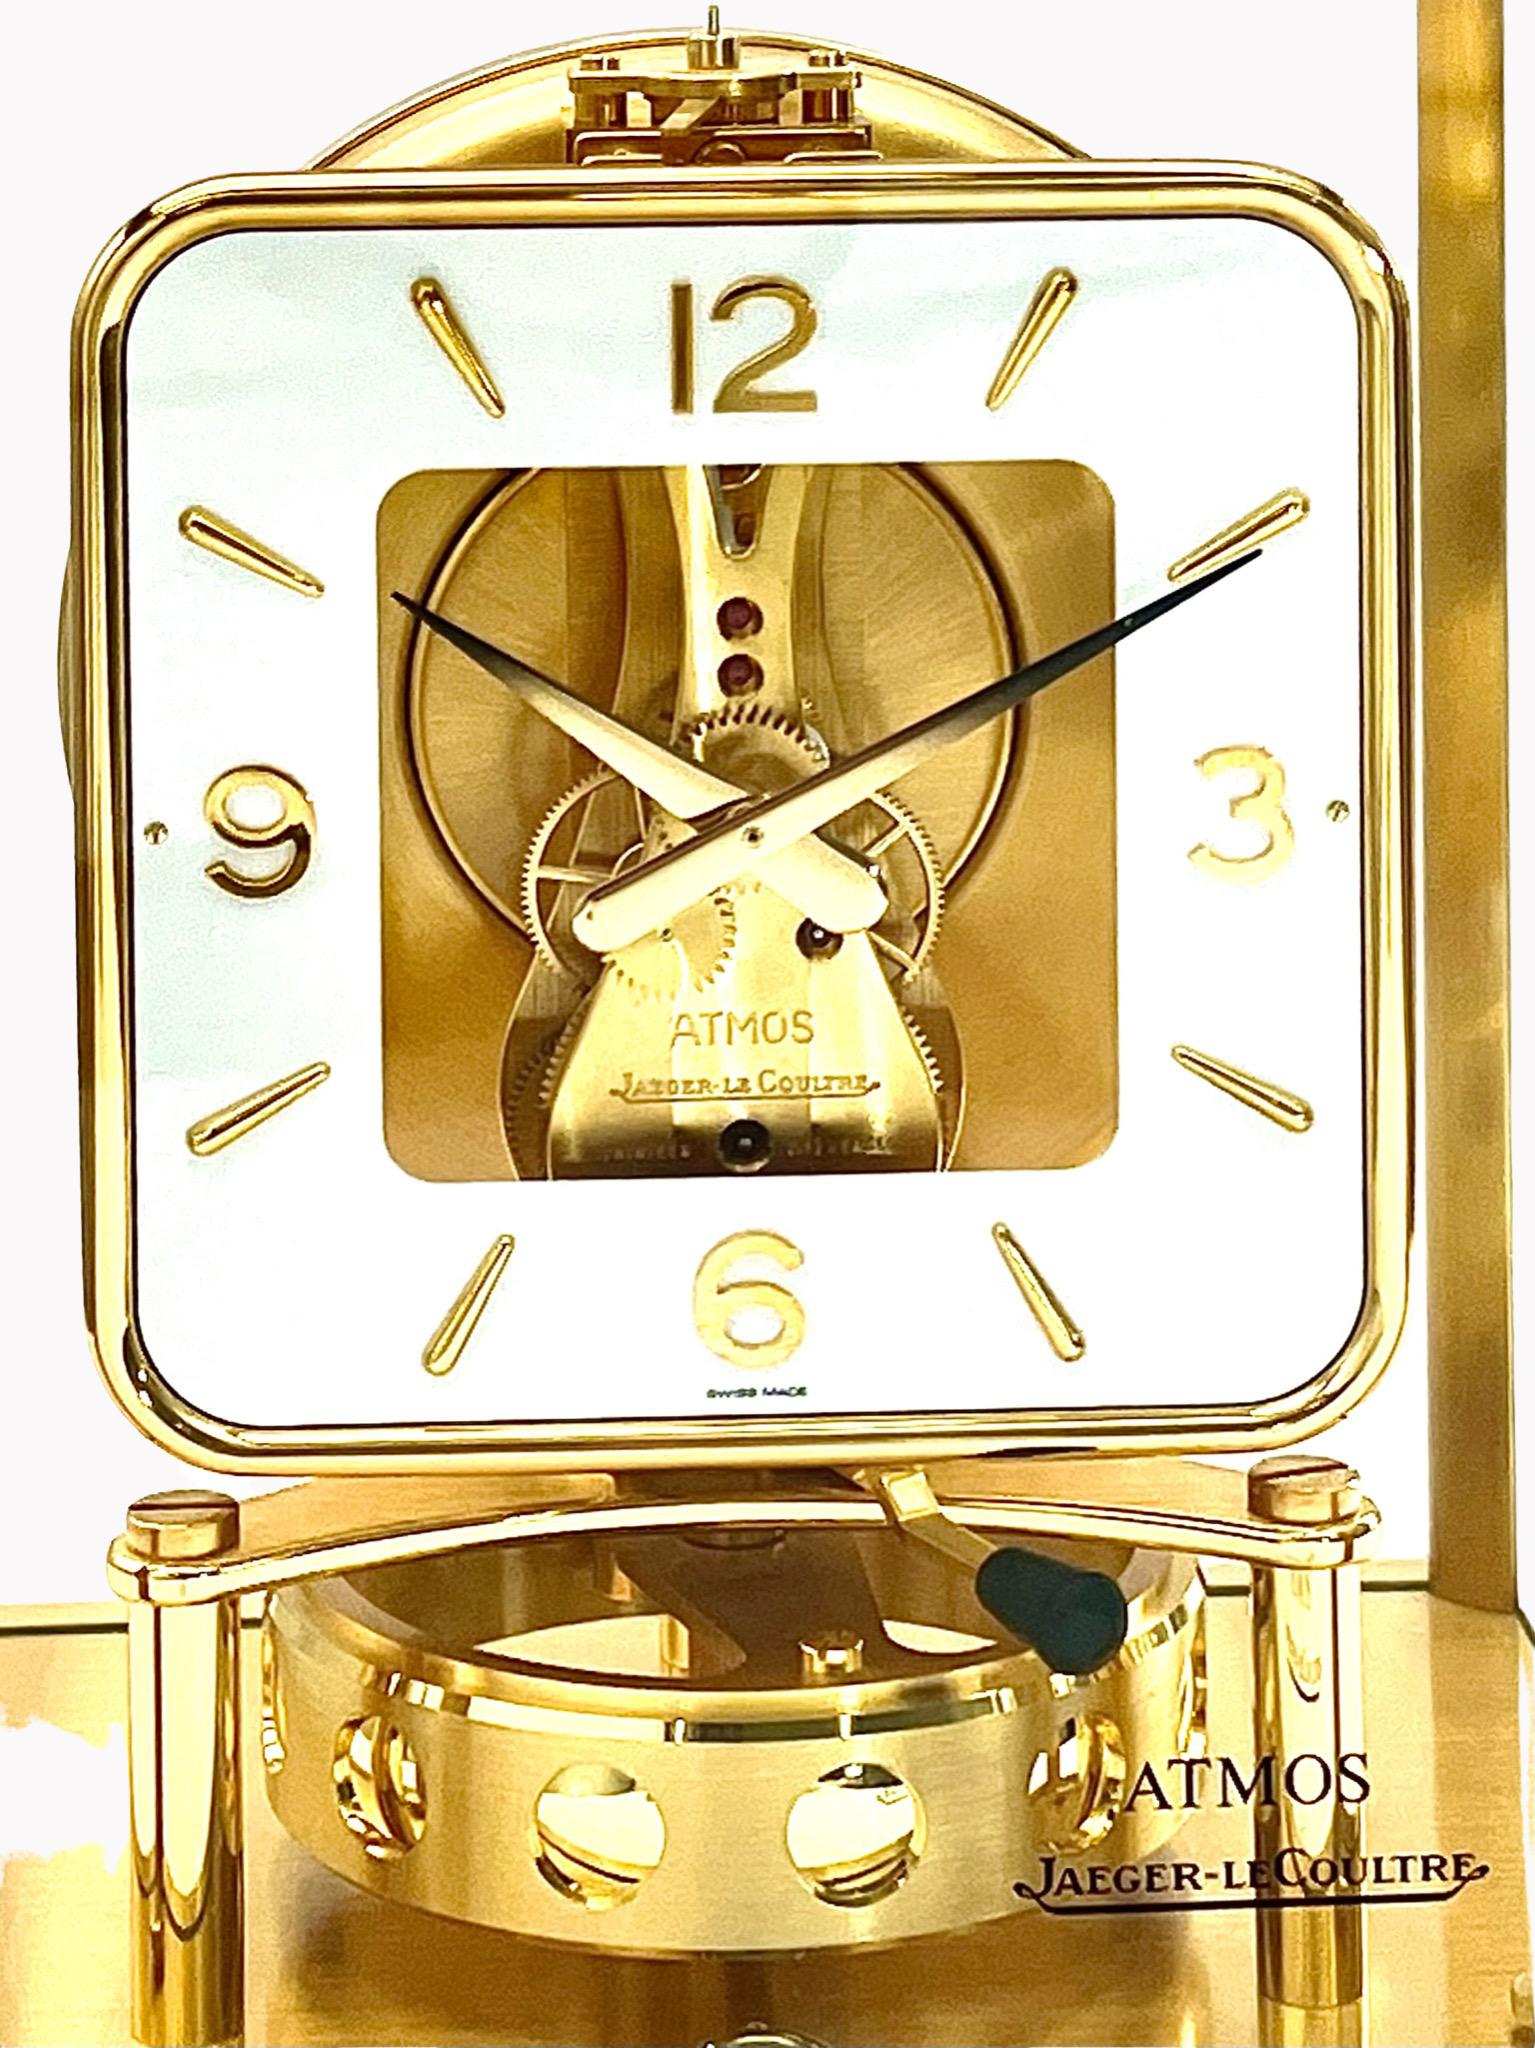 A stunning mid-century Jaeger LeCoultre Atmos clock model 544, with a stylish square dial with rounded edges. In its glass case, the Atmos clock’s unique design allows the owner to see the complexity of the machinery from all angles. As with all